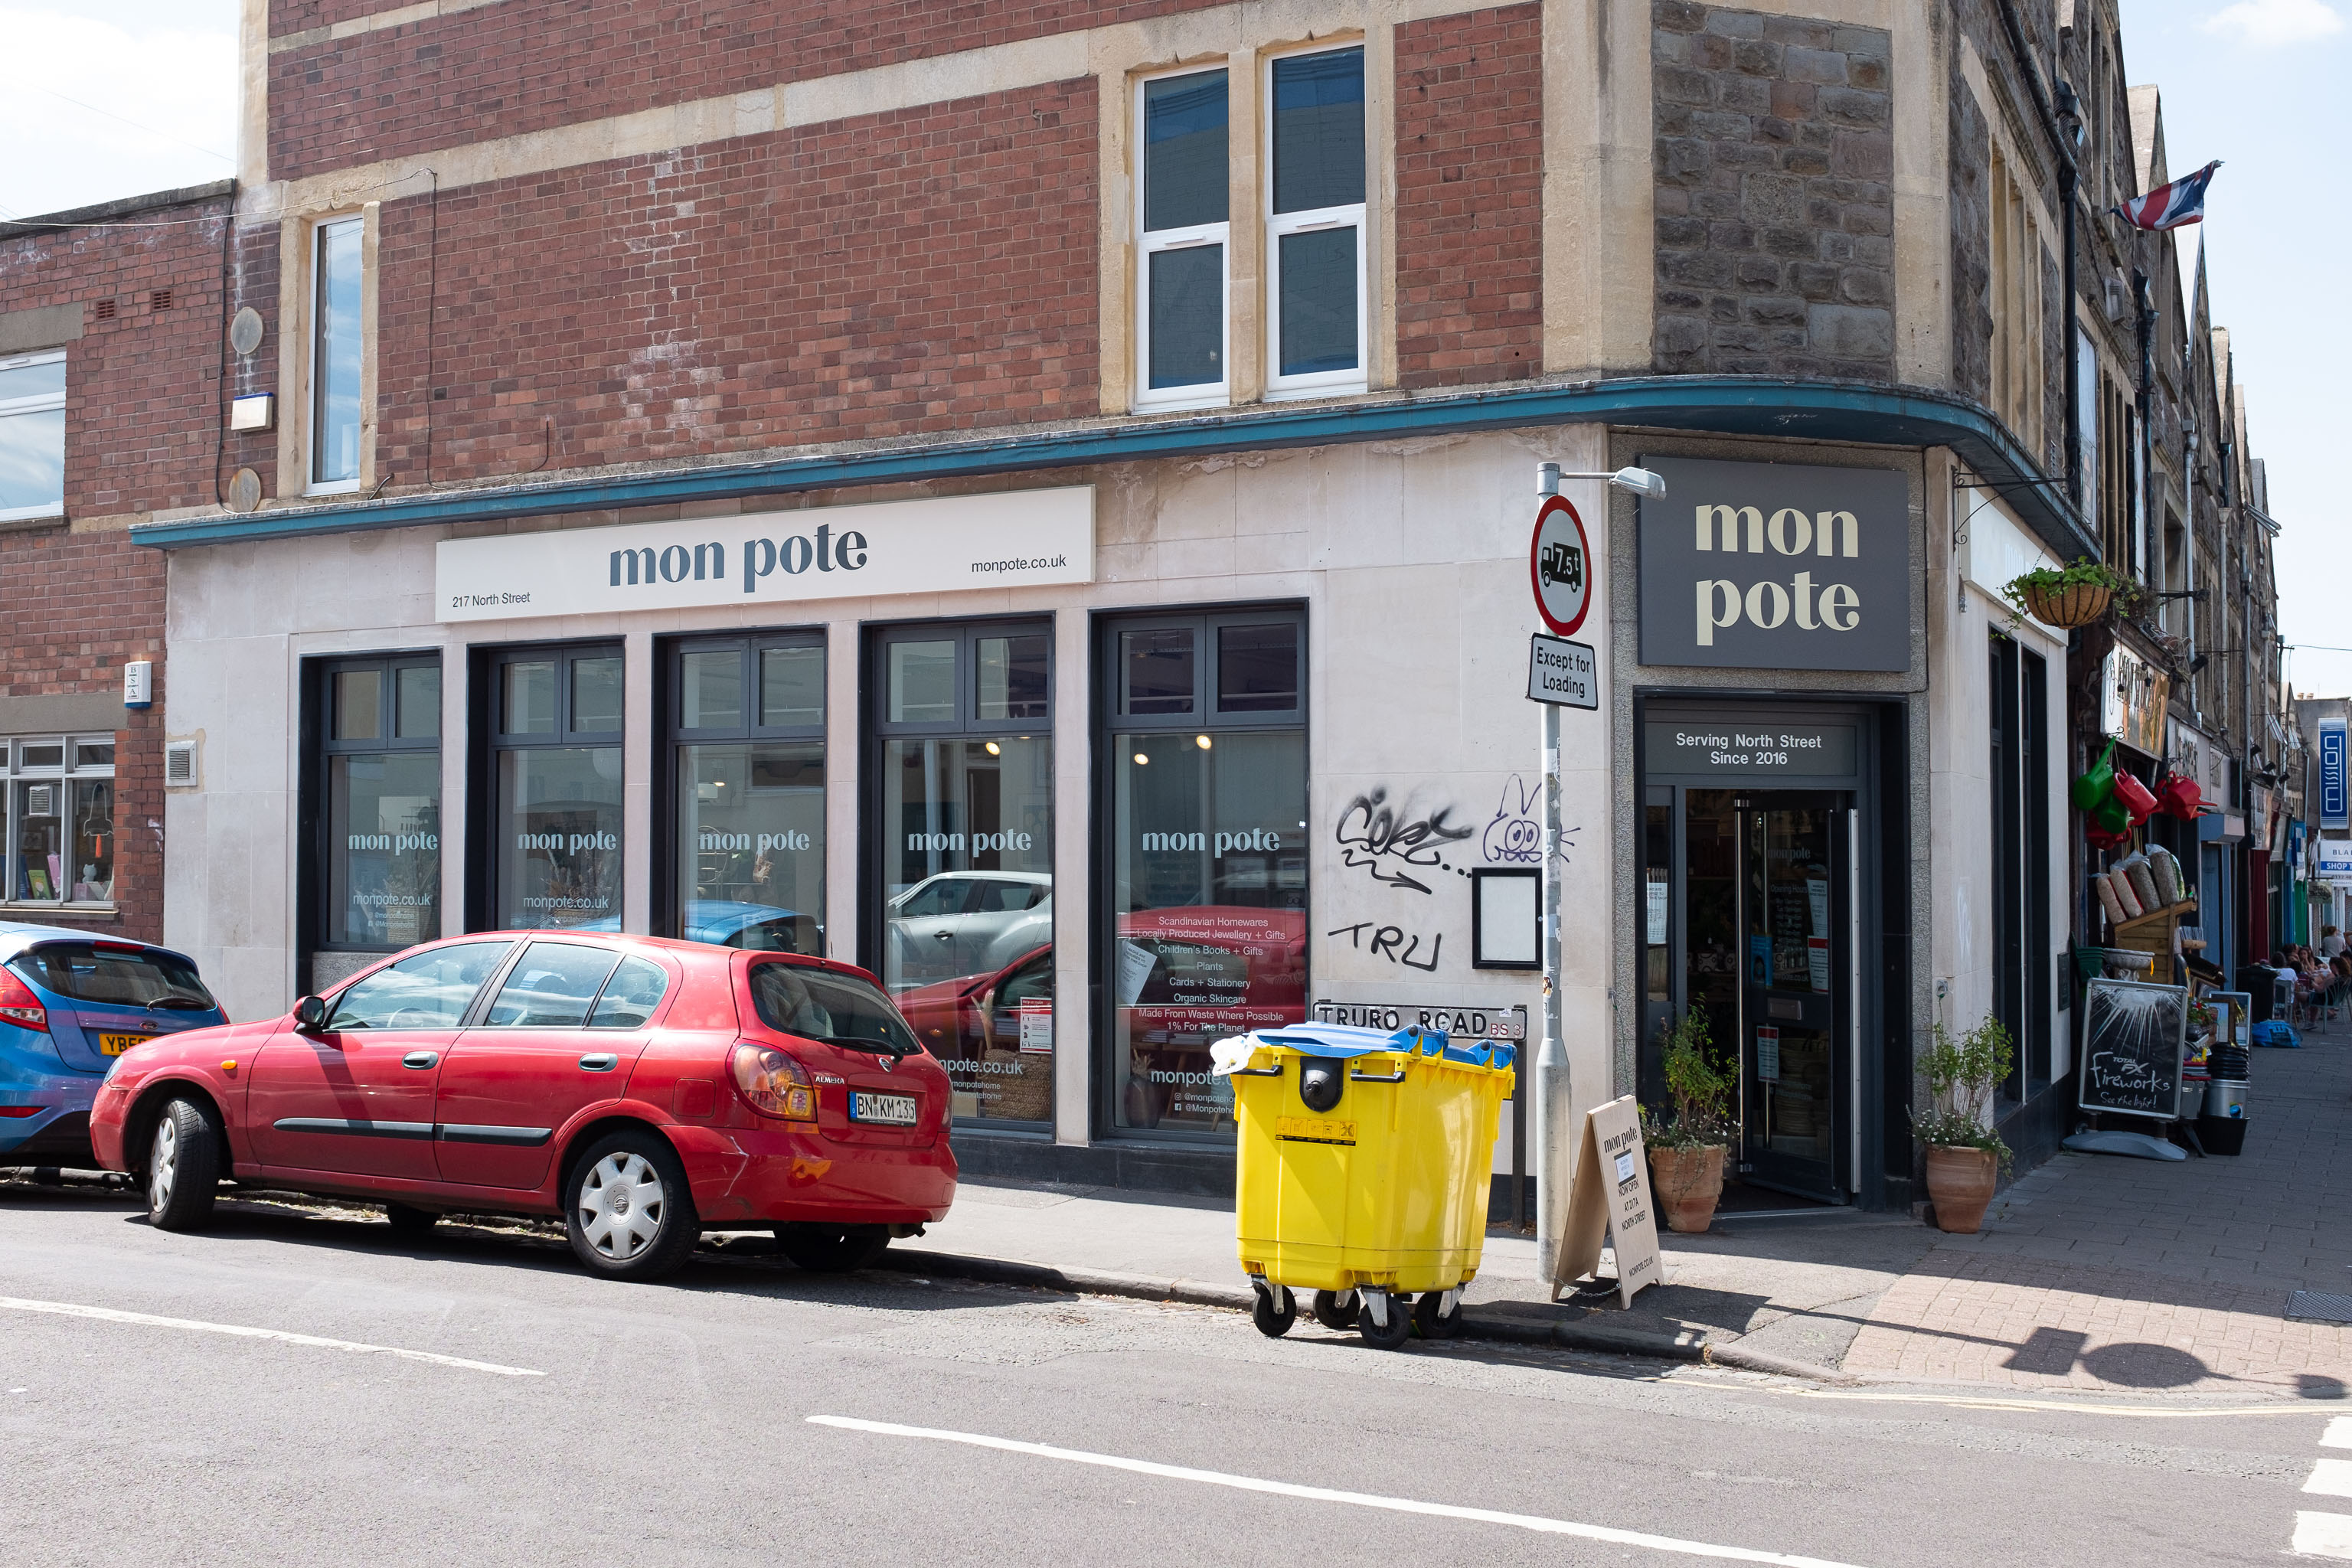 Mon Pote
This Scandinavian design shop has replaced the Hobbs House Bakery Cafe. While I enjoy Scandinavian design, anyone who's looked at my interior desig...